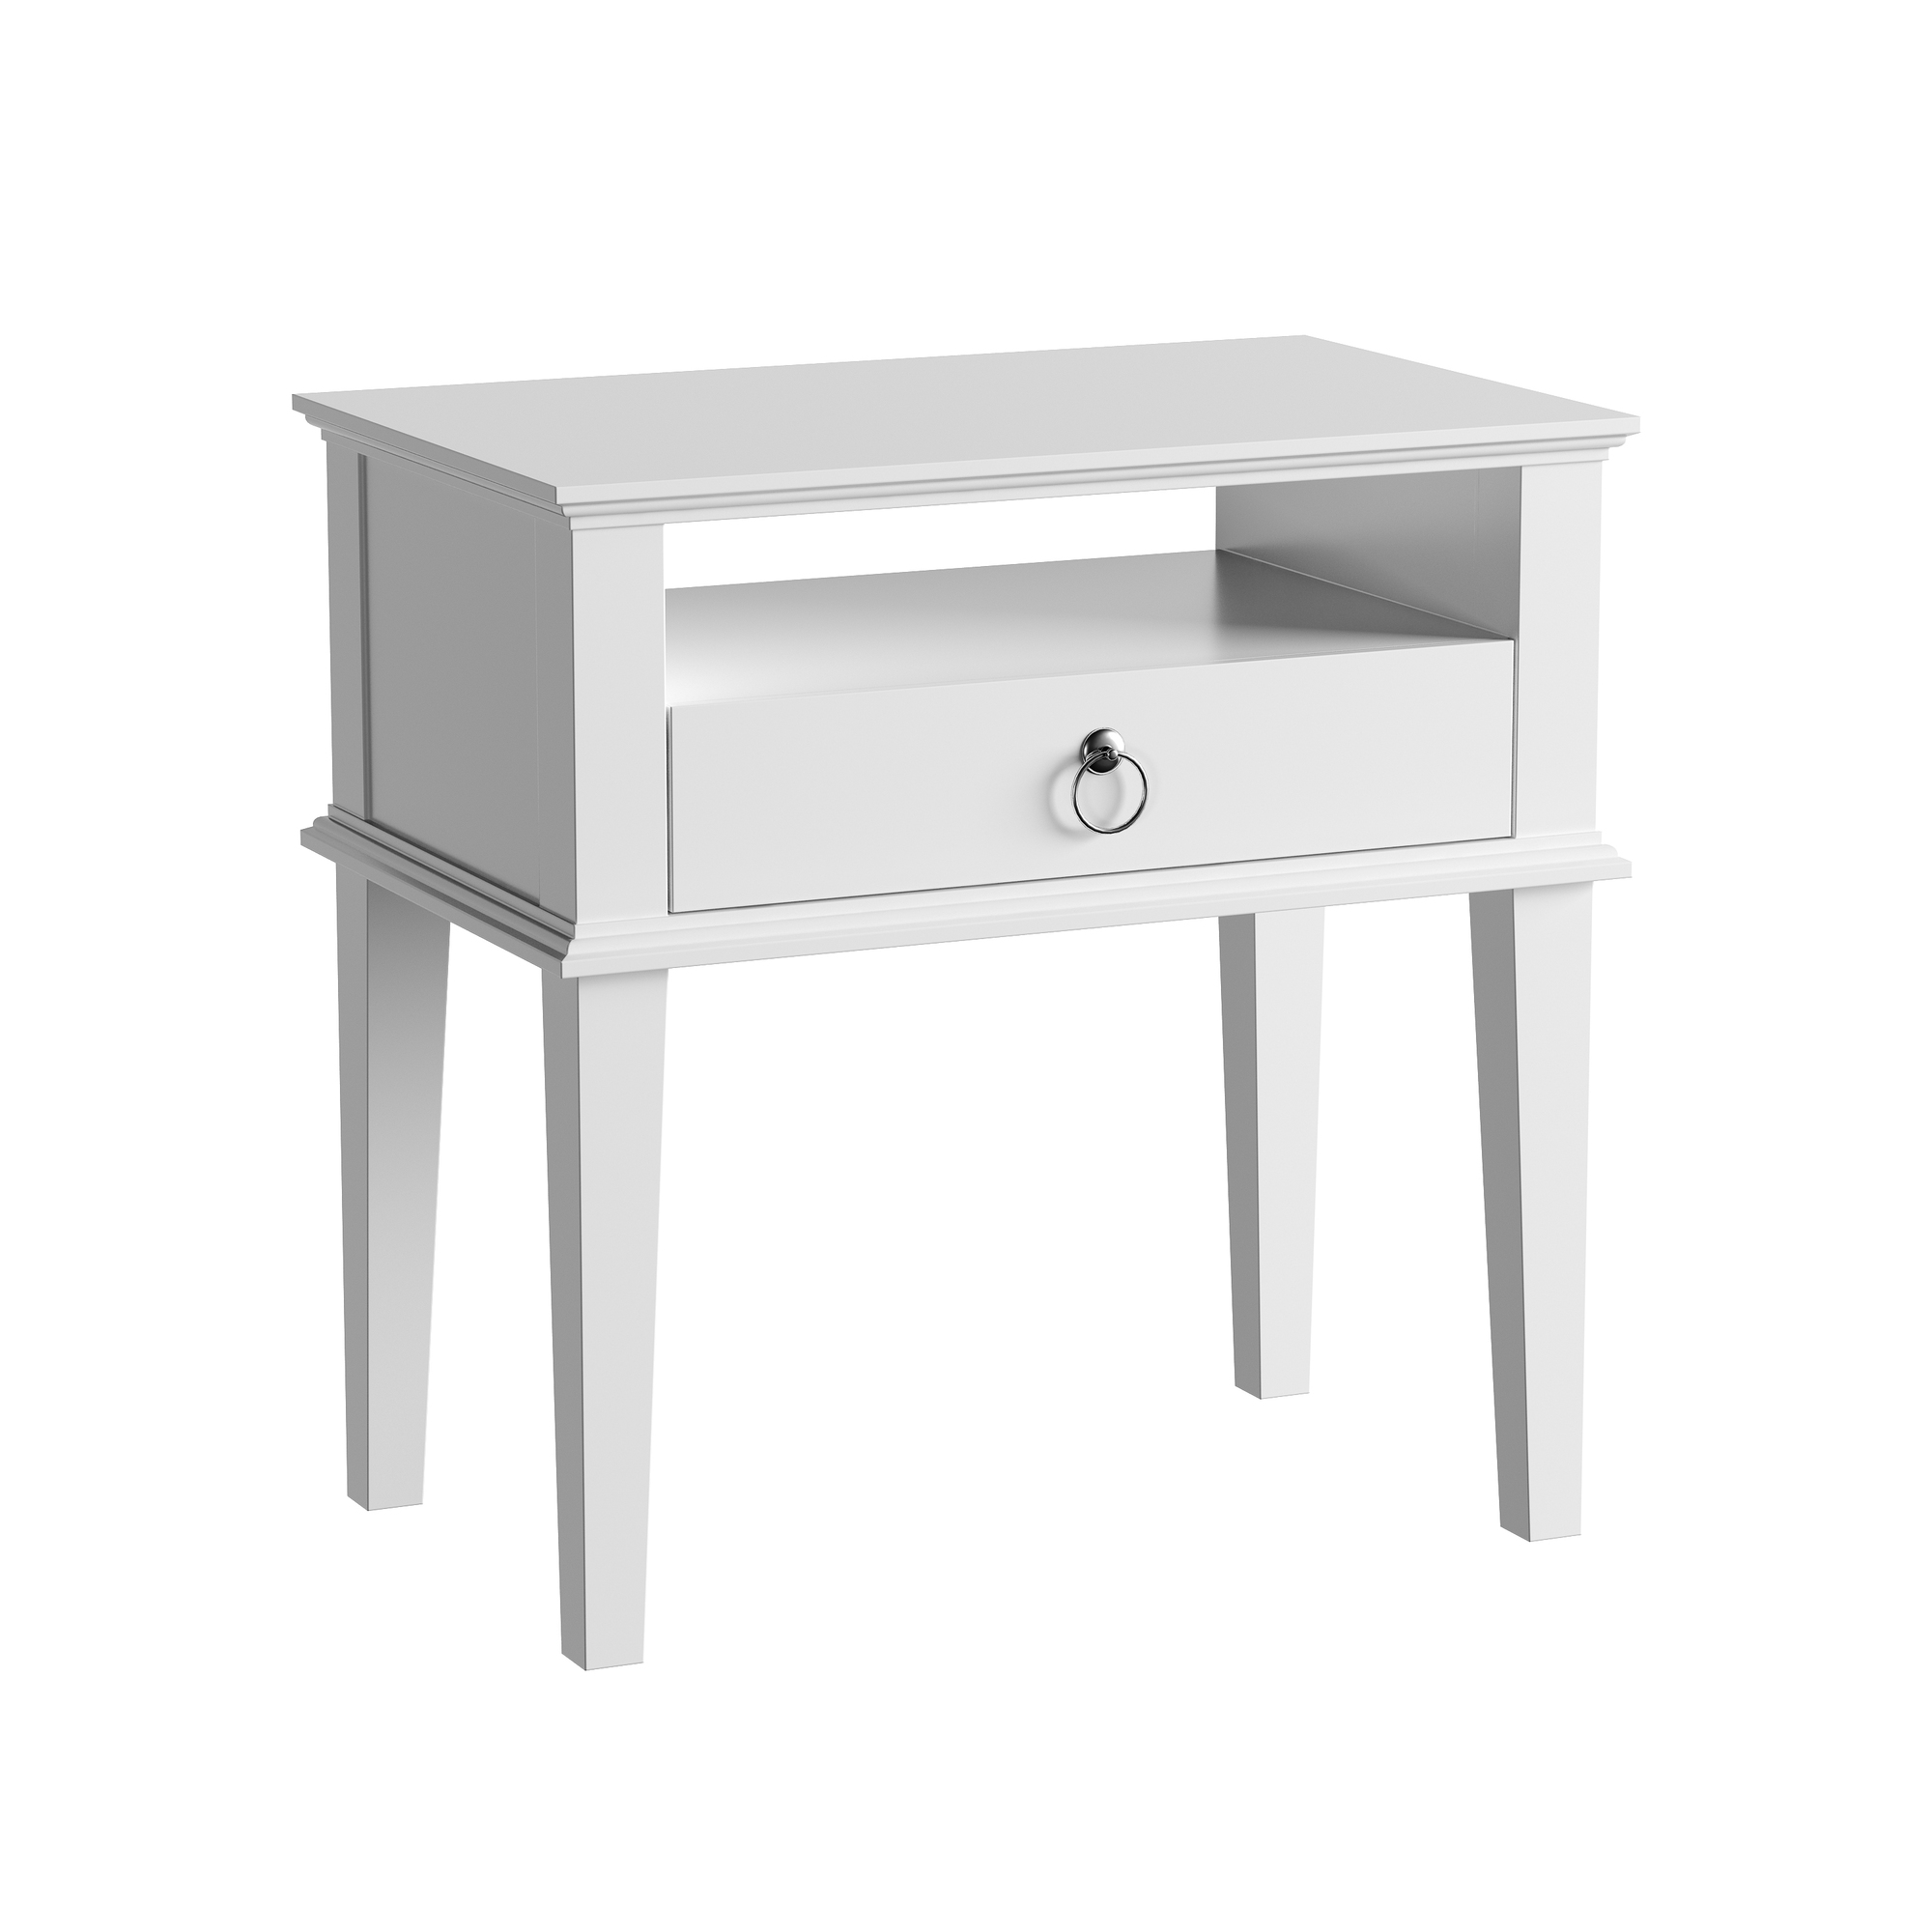 Merry Products, Vienna Nightstand, Width 23.81 in, Height 24.02 in, Depth 15 in, Model BOX0302050110